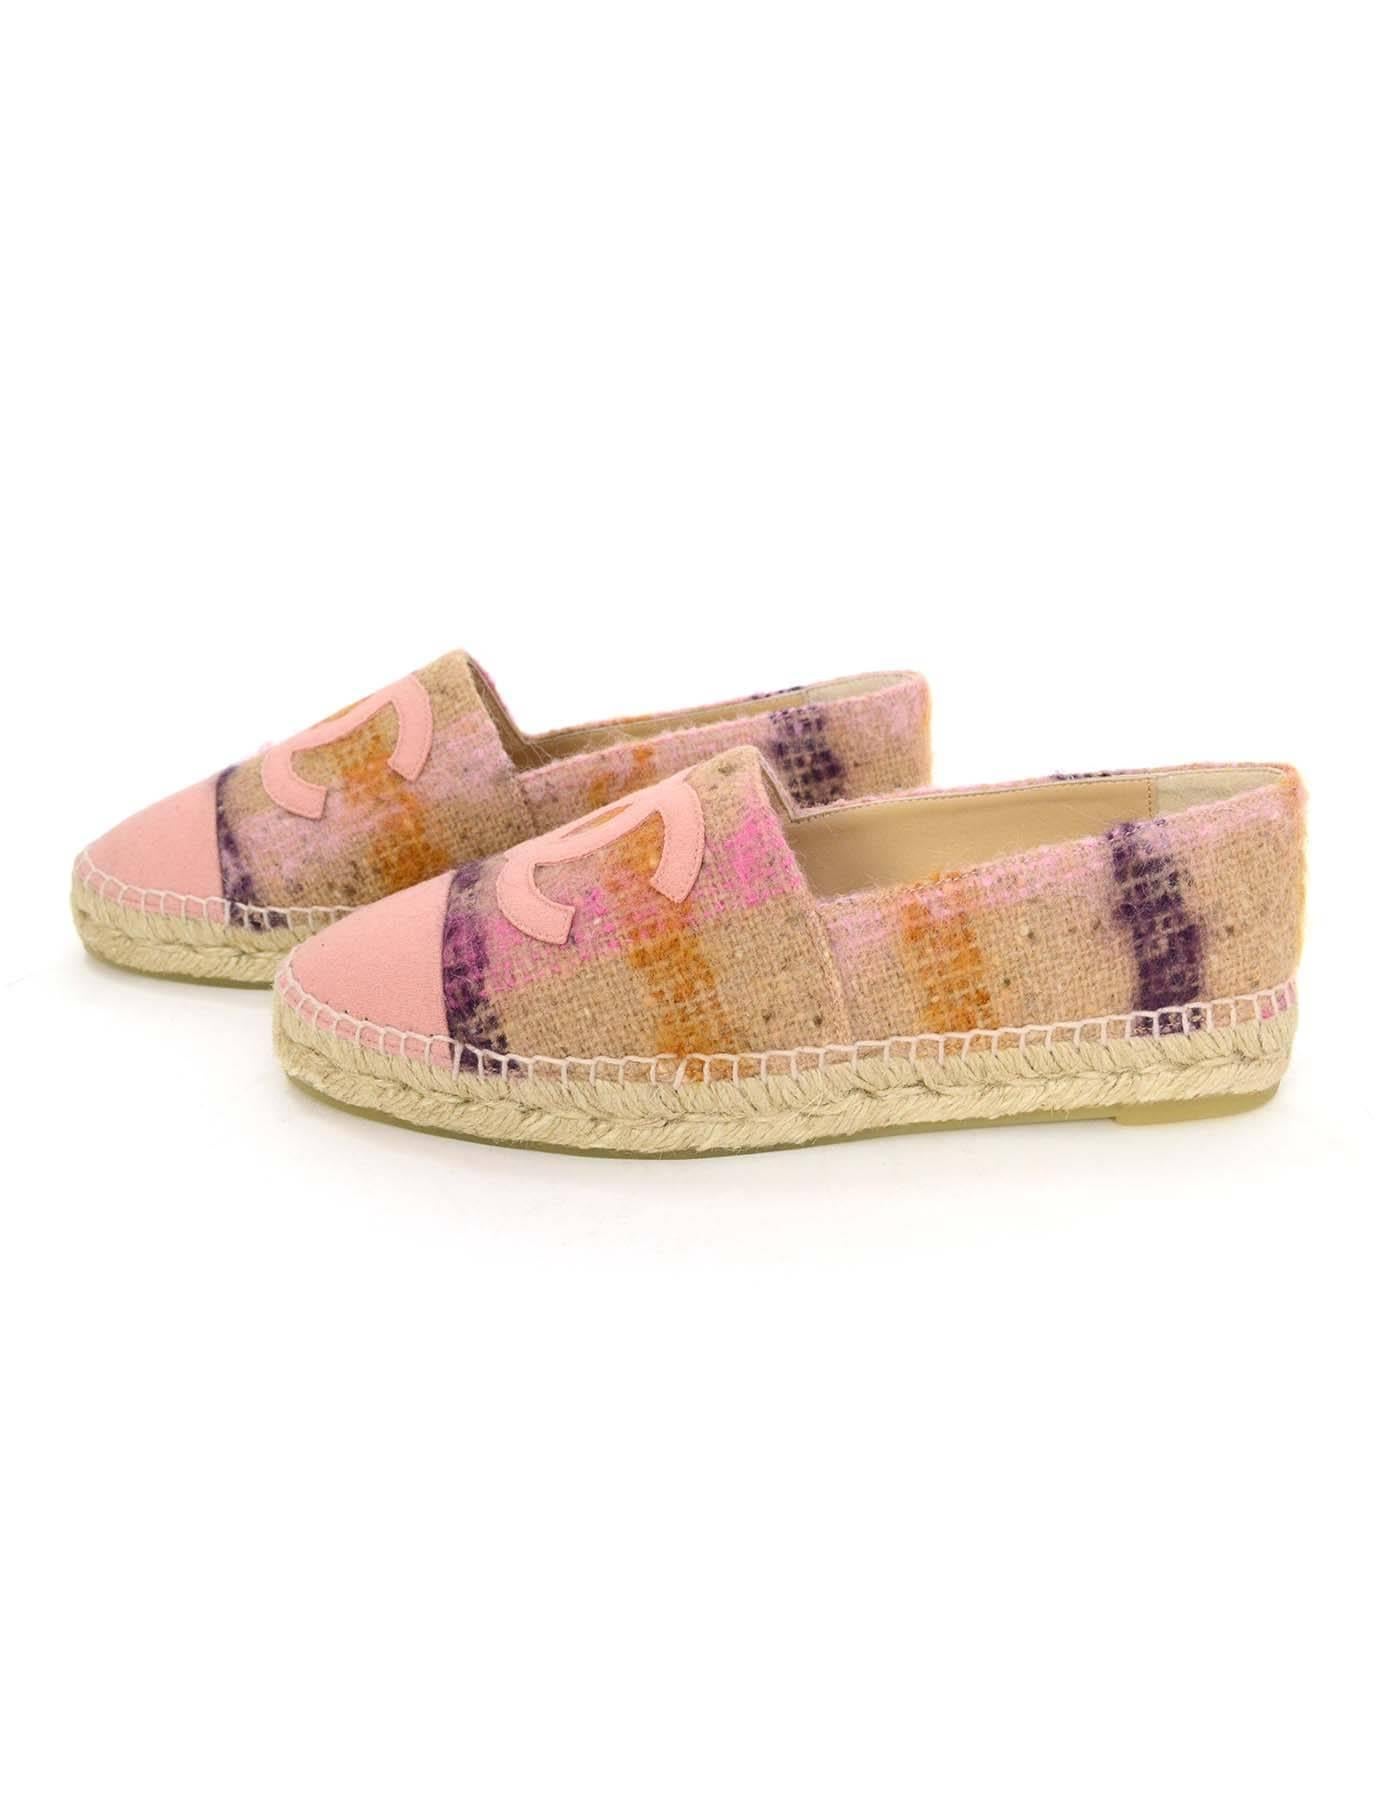 Chanel New Pink Tweed CC Espadrilles sz 39
Features cap toe flannel tweed with CC logo 

Made In: Spain
Color: Pink, beige and peach 
Materials: Tweed flannel textile and jute rope
Closure/Opening: Slide on
Sole Stamp: 39 Made In Spain Chanel